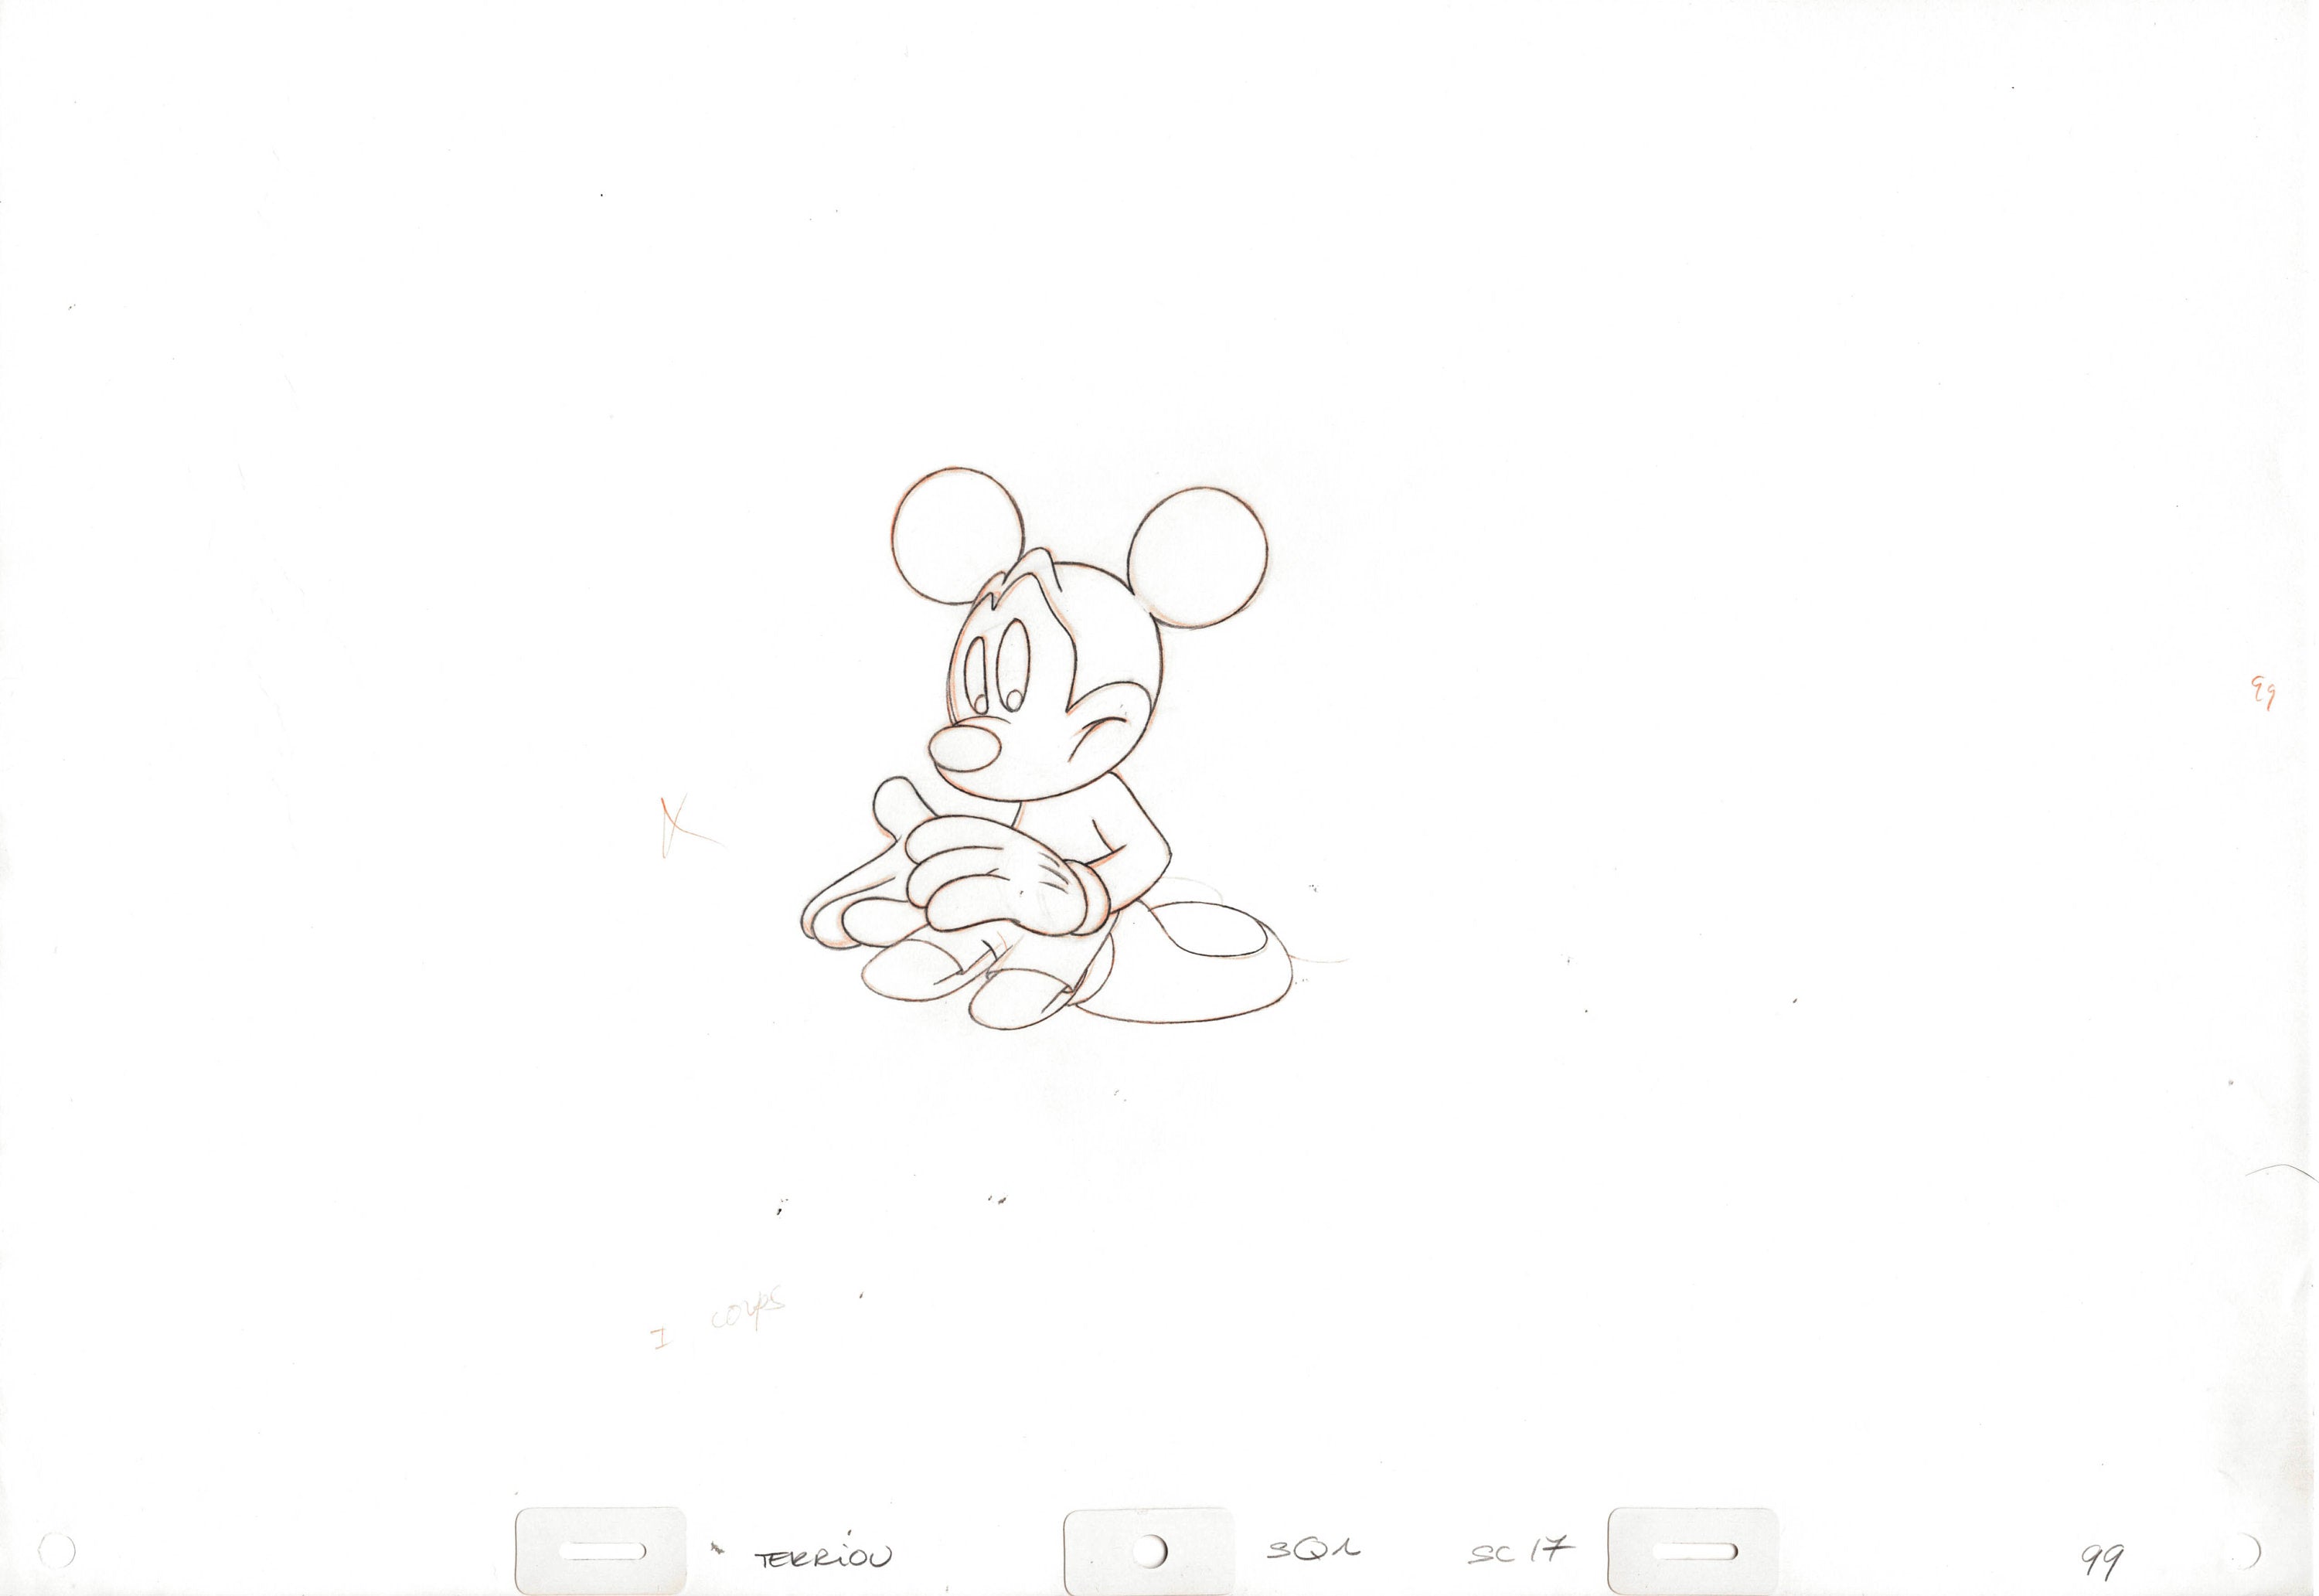 How to draw Mickey Mouse | Step by step Drawing tutorials